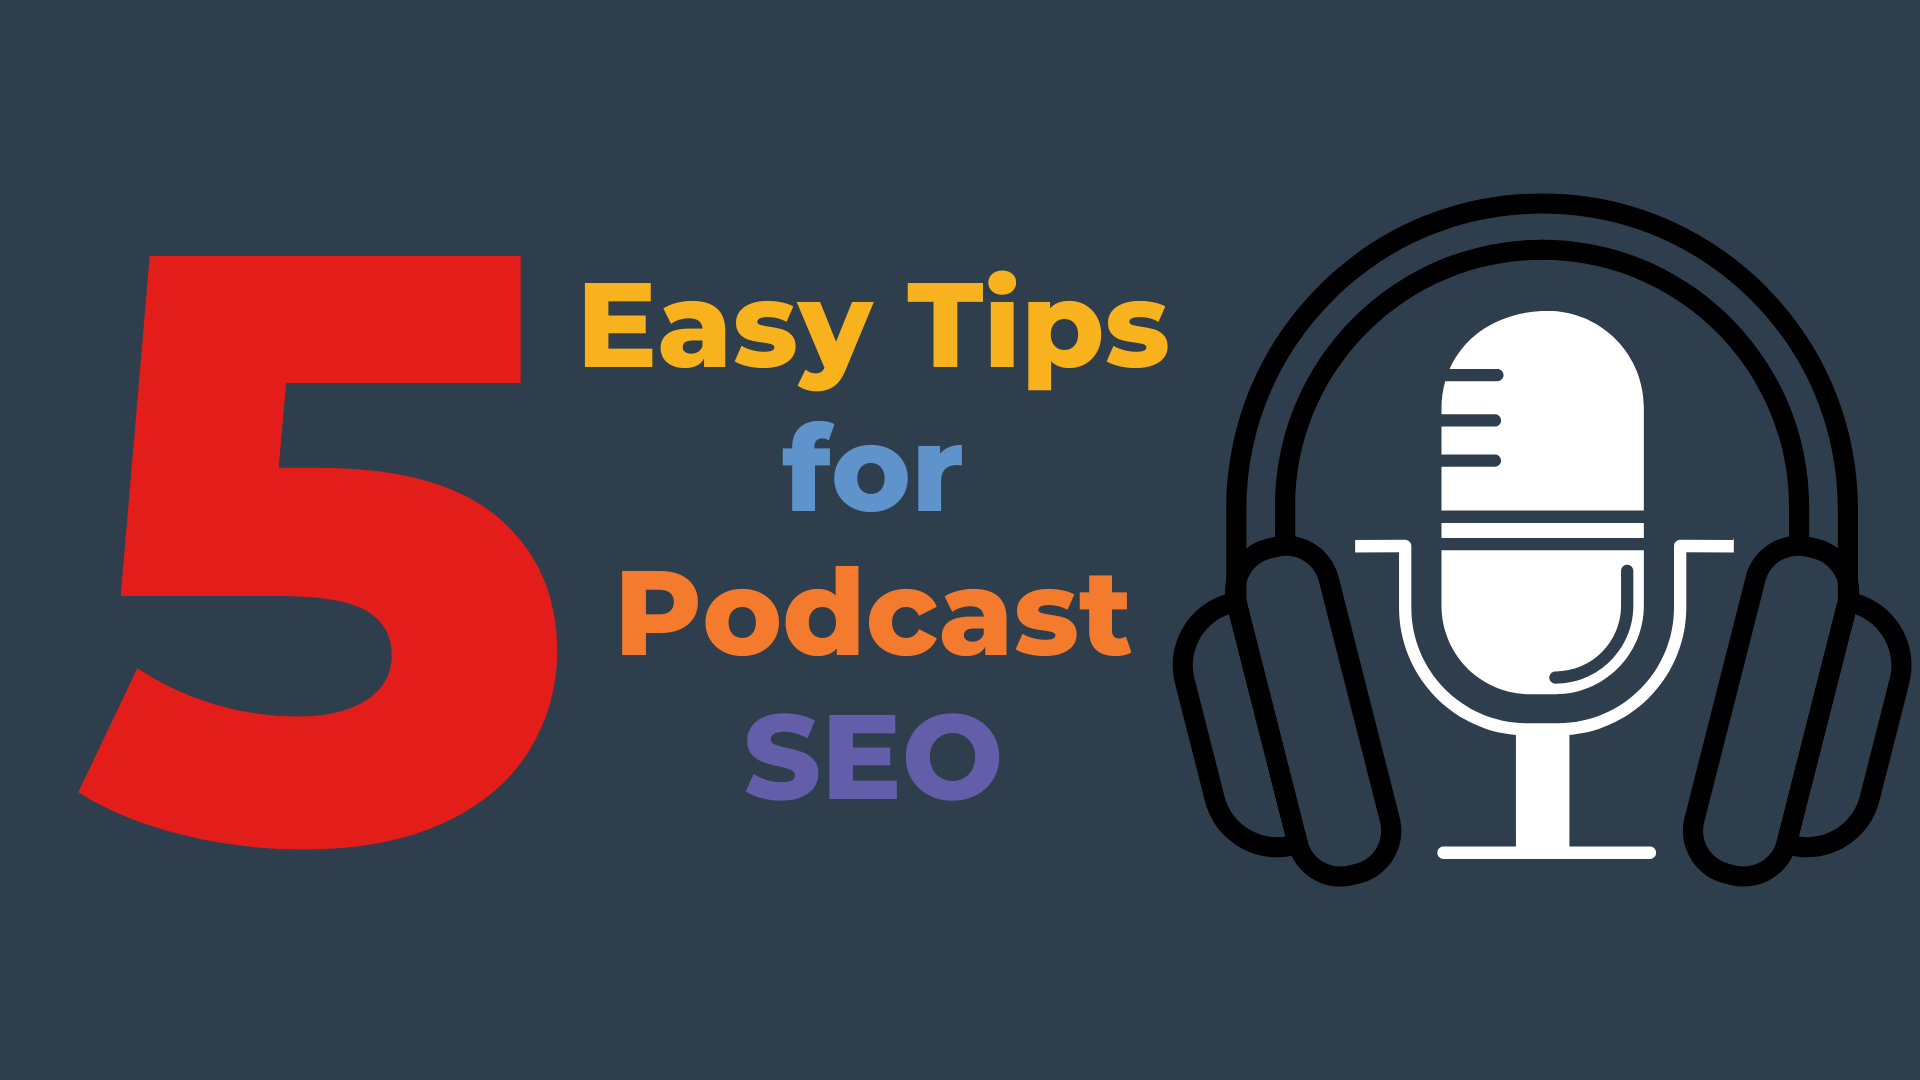 5 Easy Tips for Podcast SEO